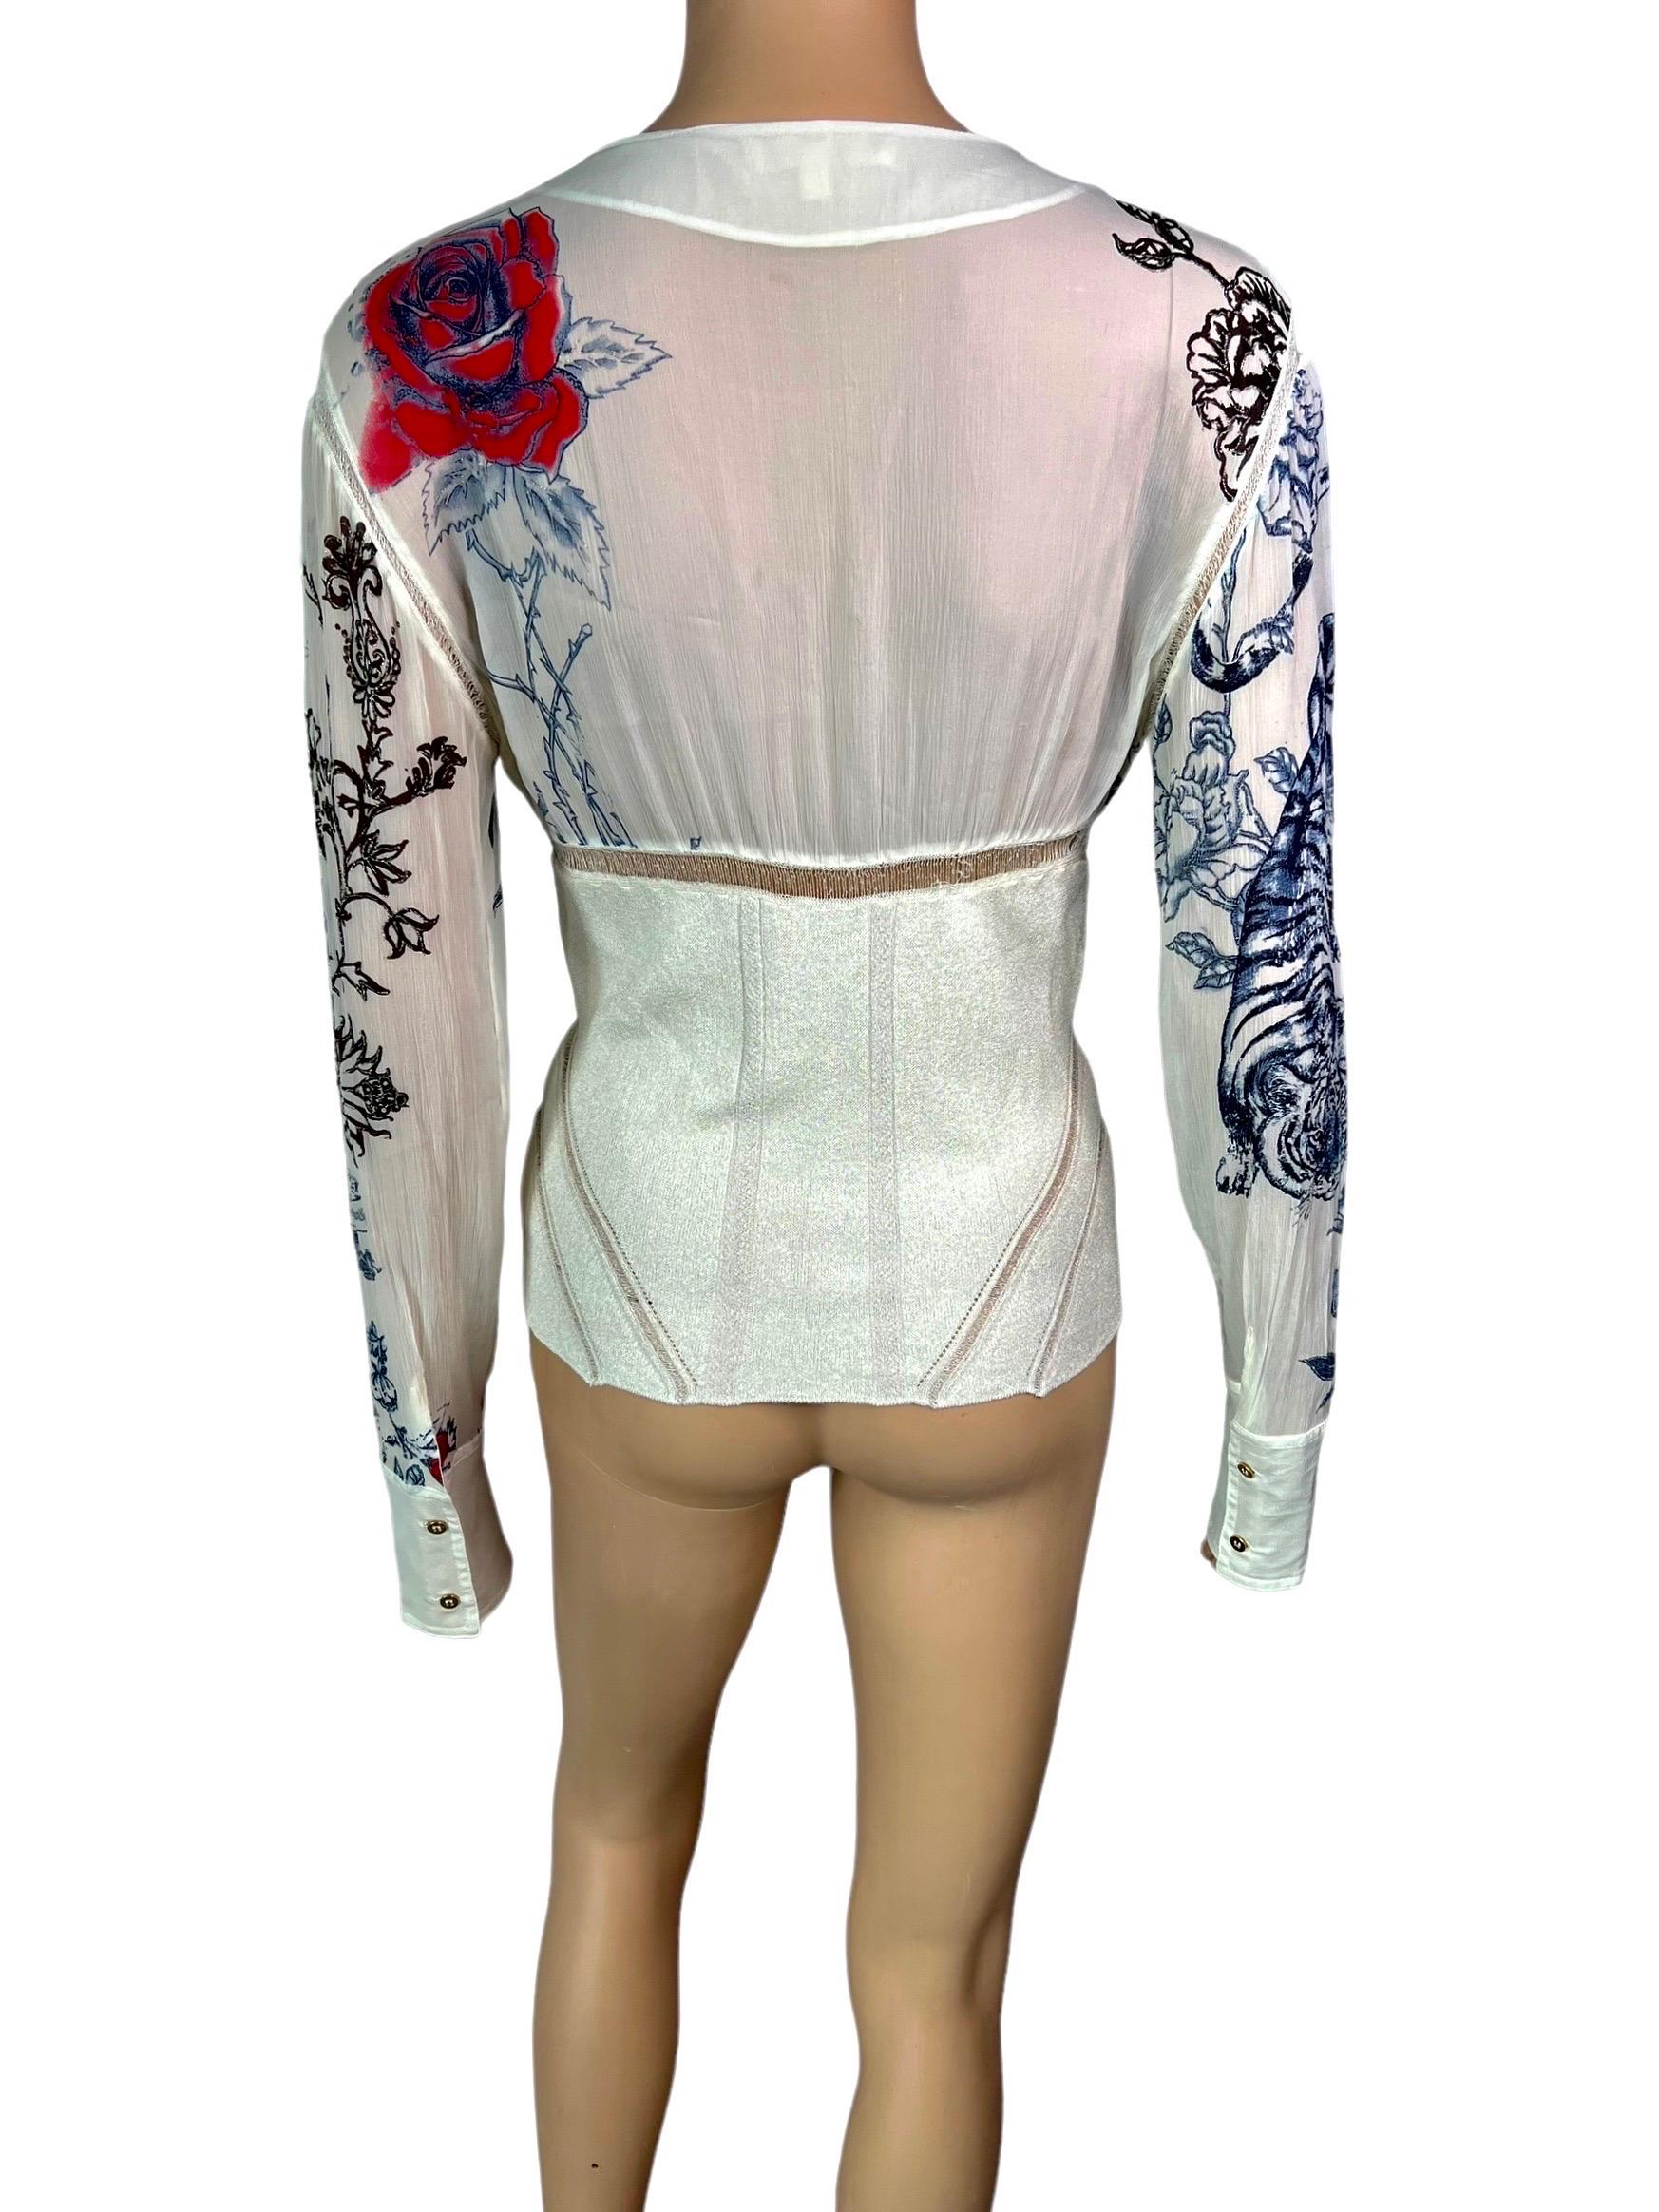 Roberto Cavalli S/S 2003 Tattoo Print Plunging Silk Knit Sheer Panels Blouse Top For Sale 1